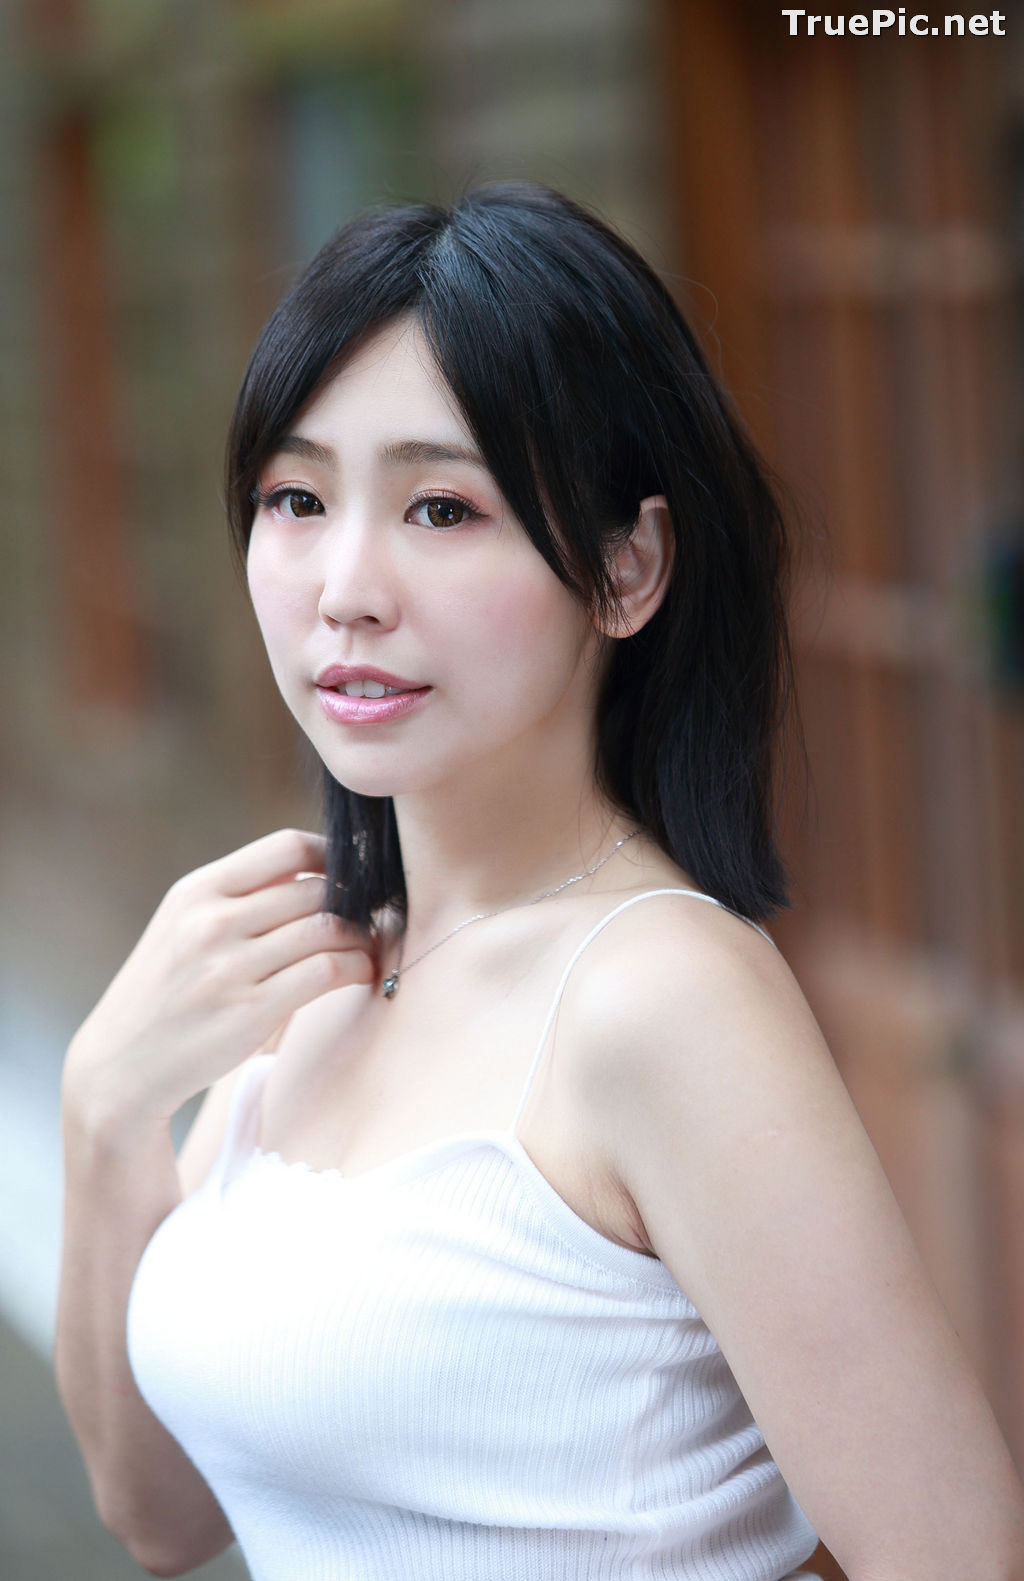 Image Taiwanese Model - 陳希希 - Lovely and Pure Girl - TruePic.net - Picture-19